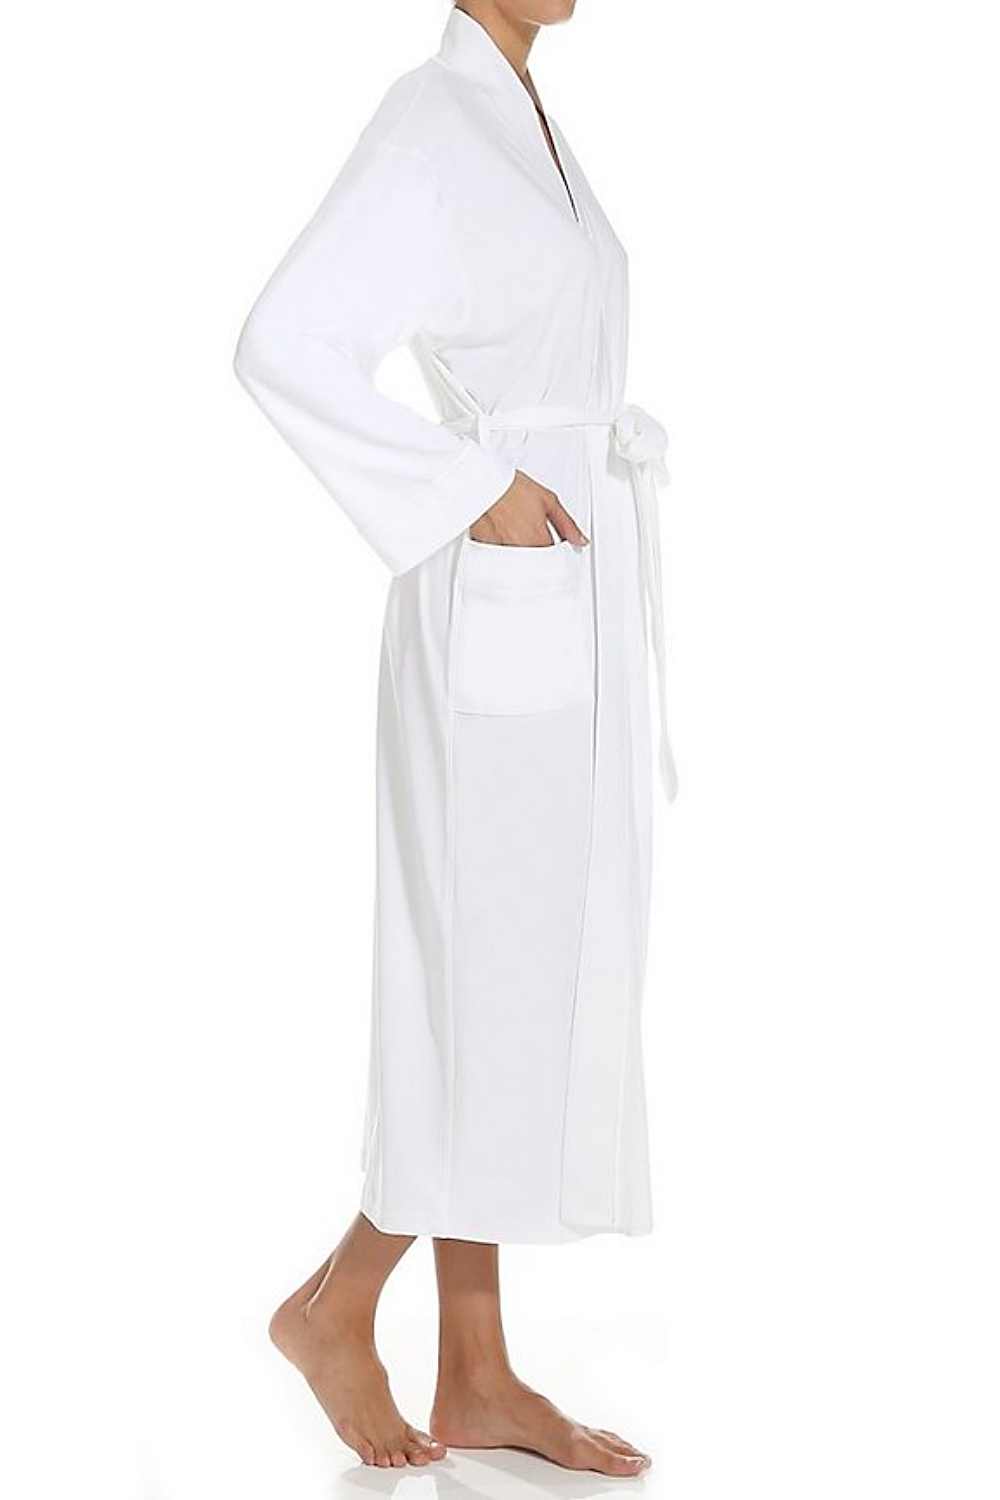 Robes for sale in natural eco-friendly fabrics come in a growing variety of textures and styles that suit every occasion!